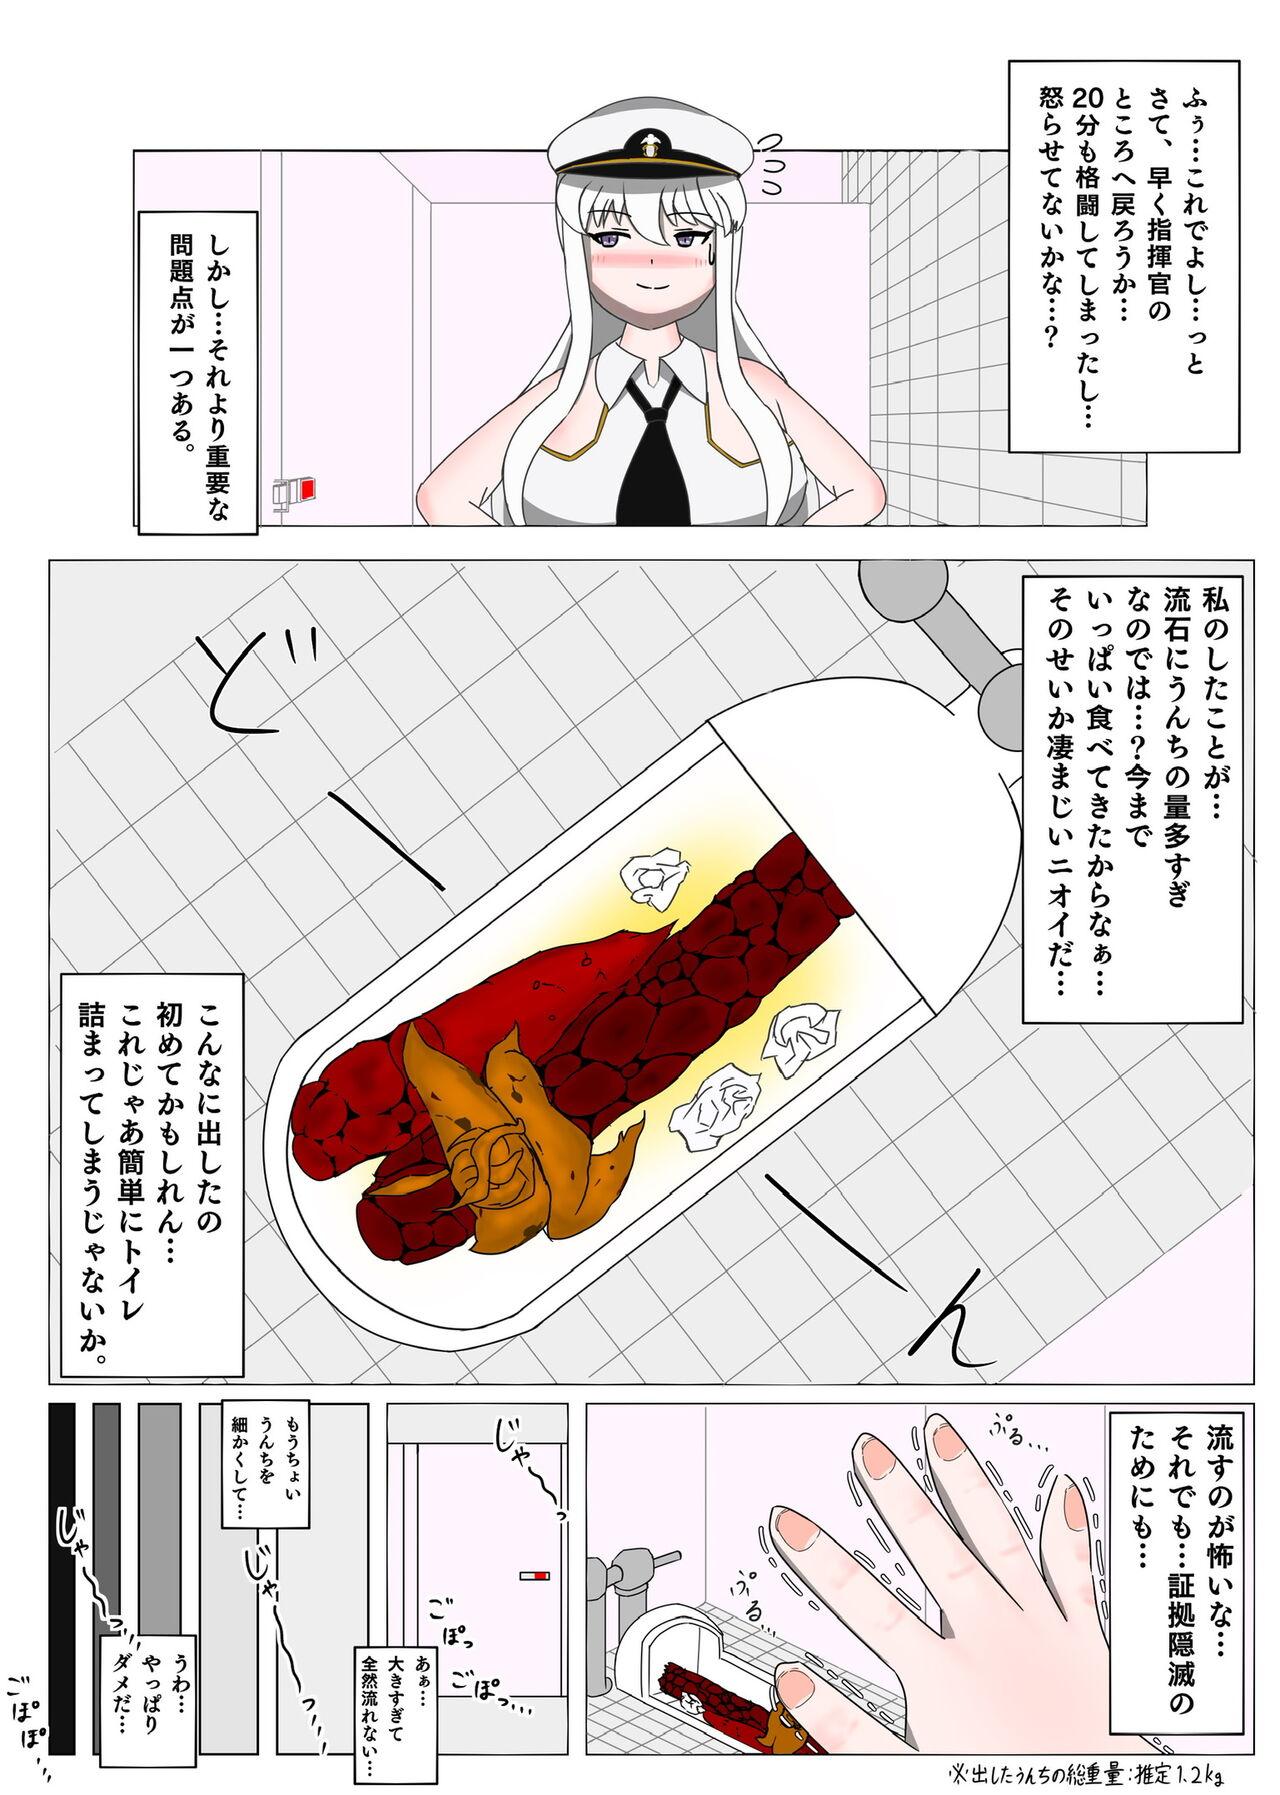 A manga in which Enterprise relieves 3 days' worth of poop in a Japanese-style toilet 13